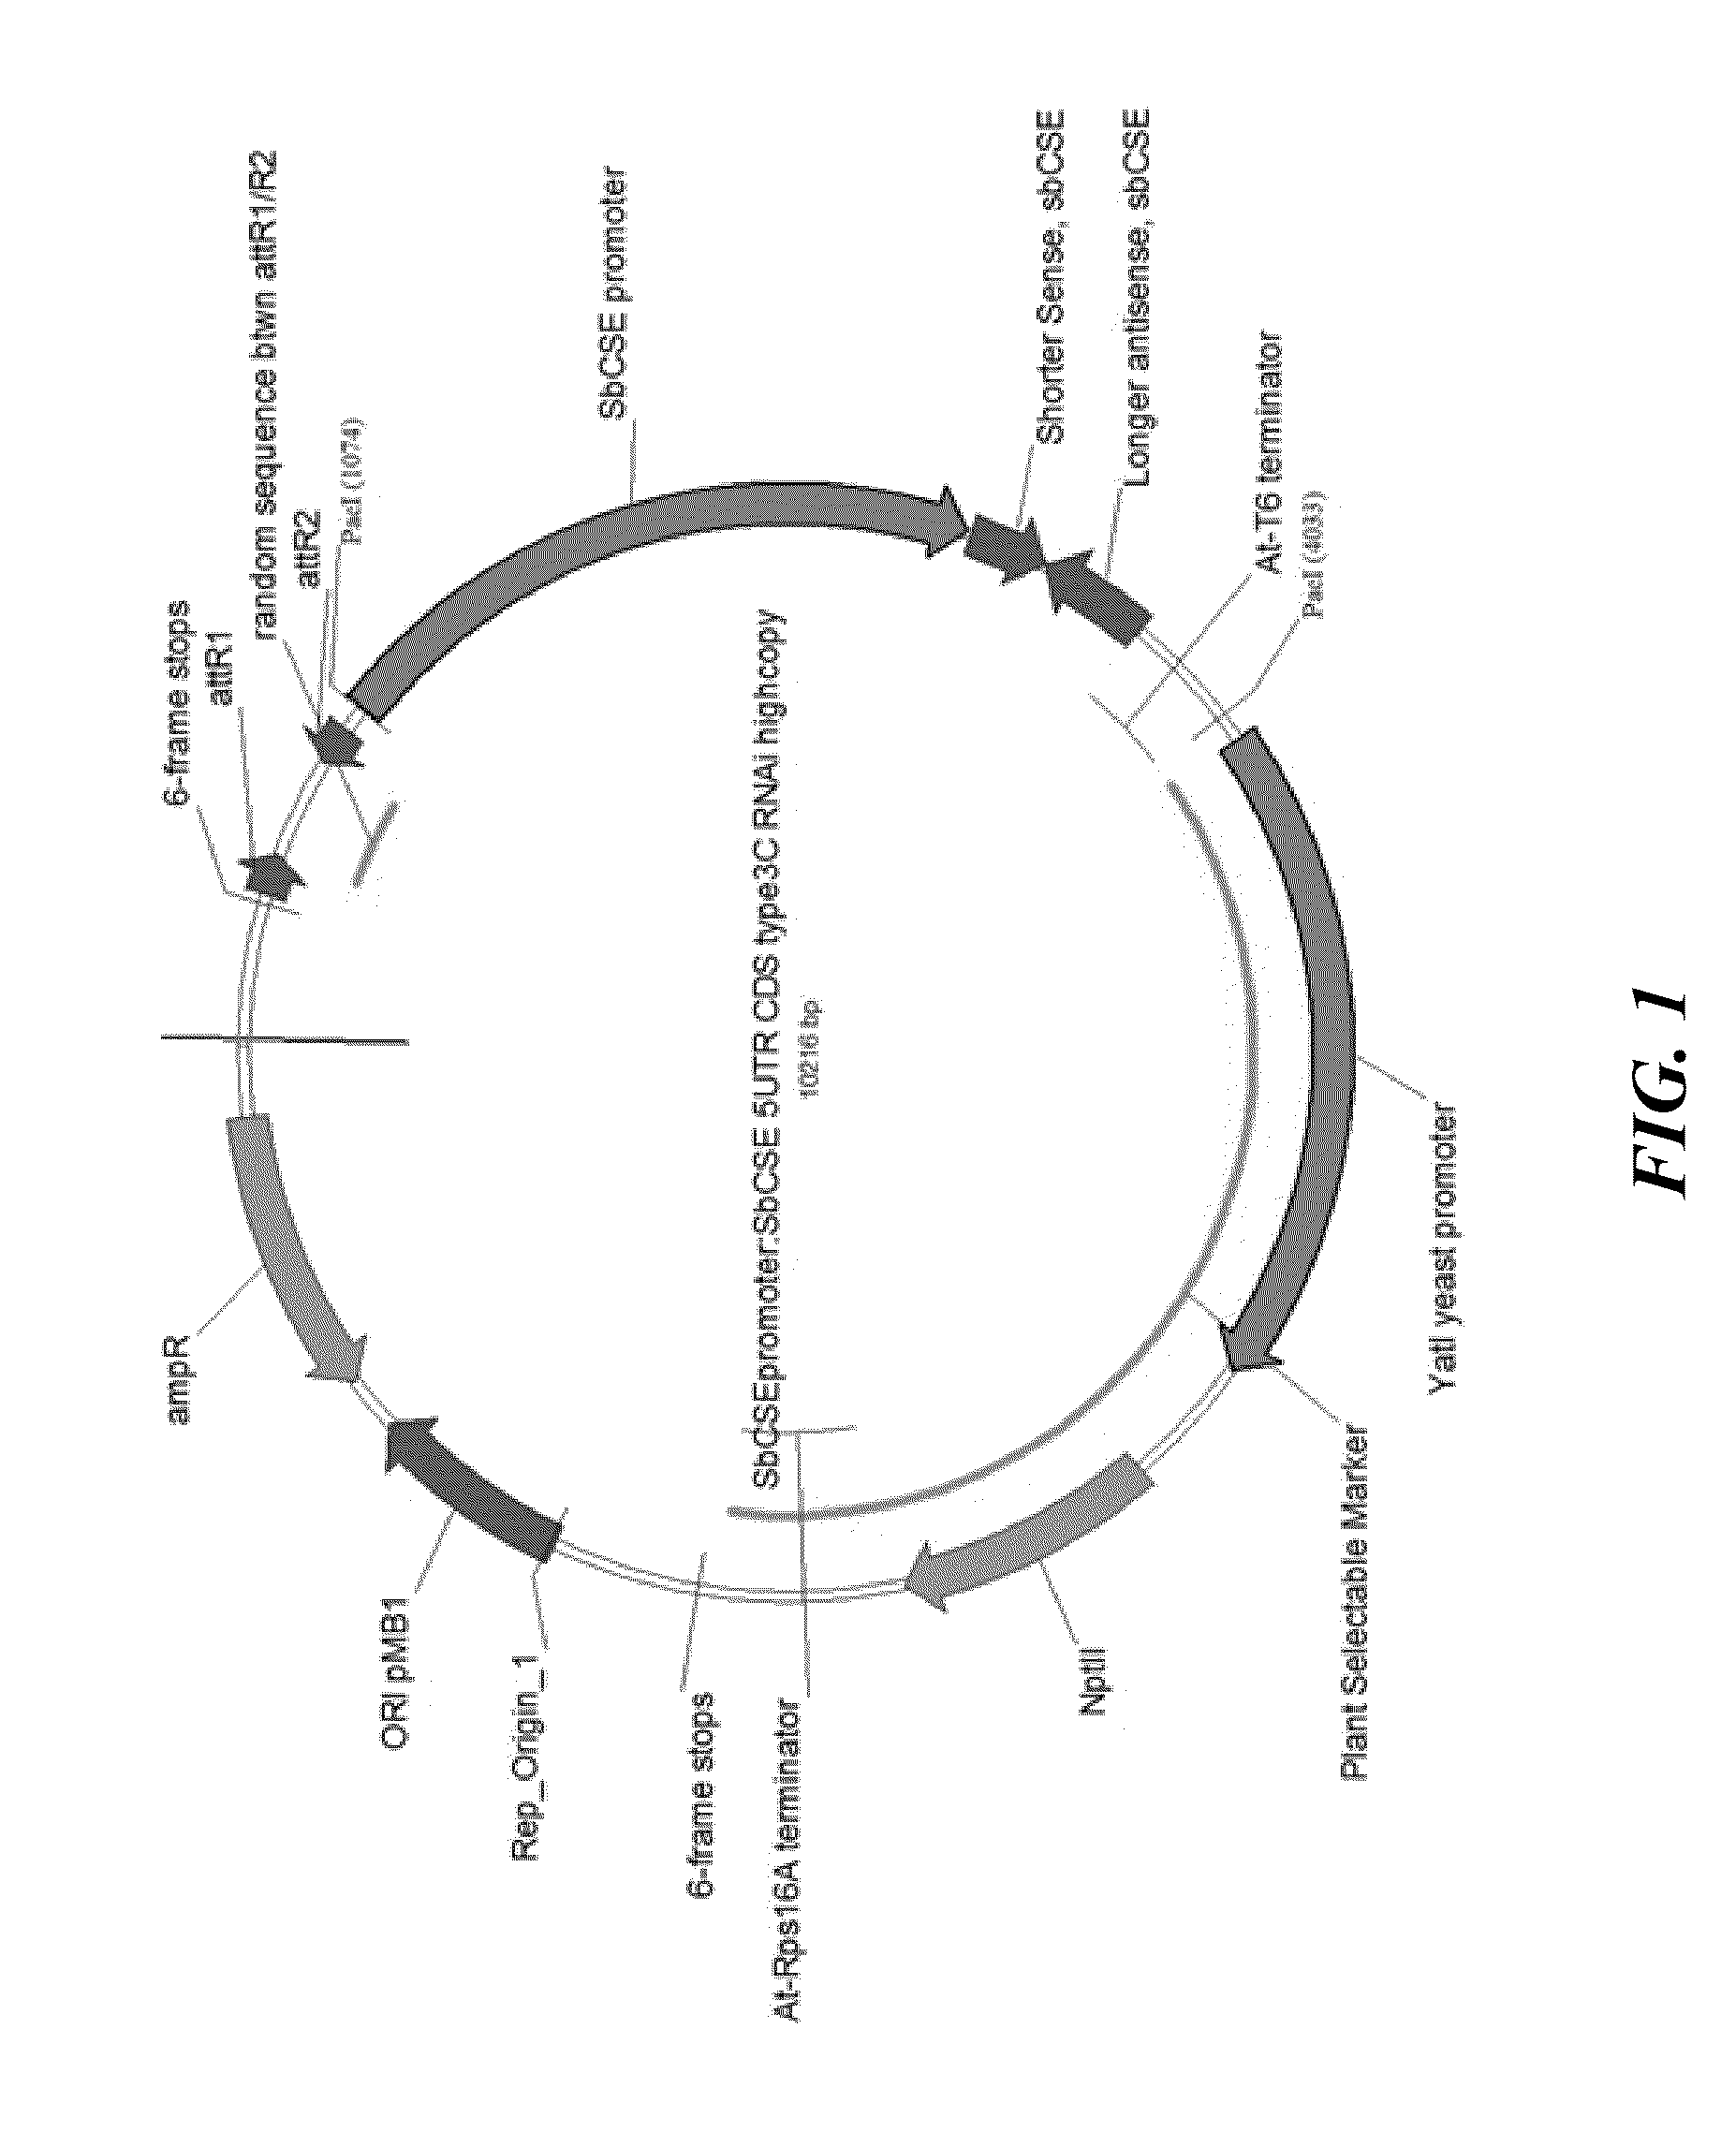 Compositions for reduced lignin content in sorghum and improving cell wall digestibility, and methods of making the same